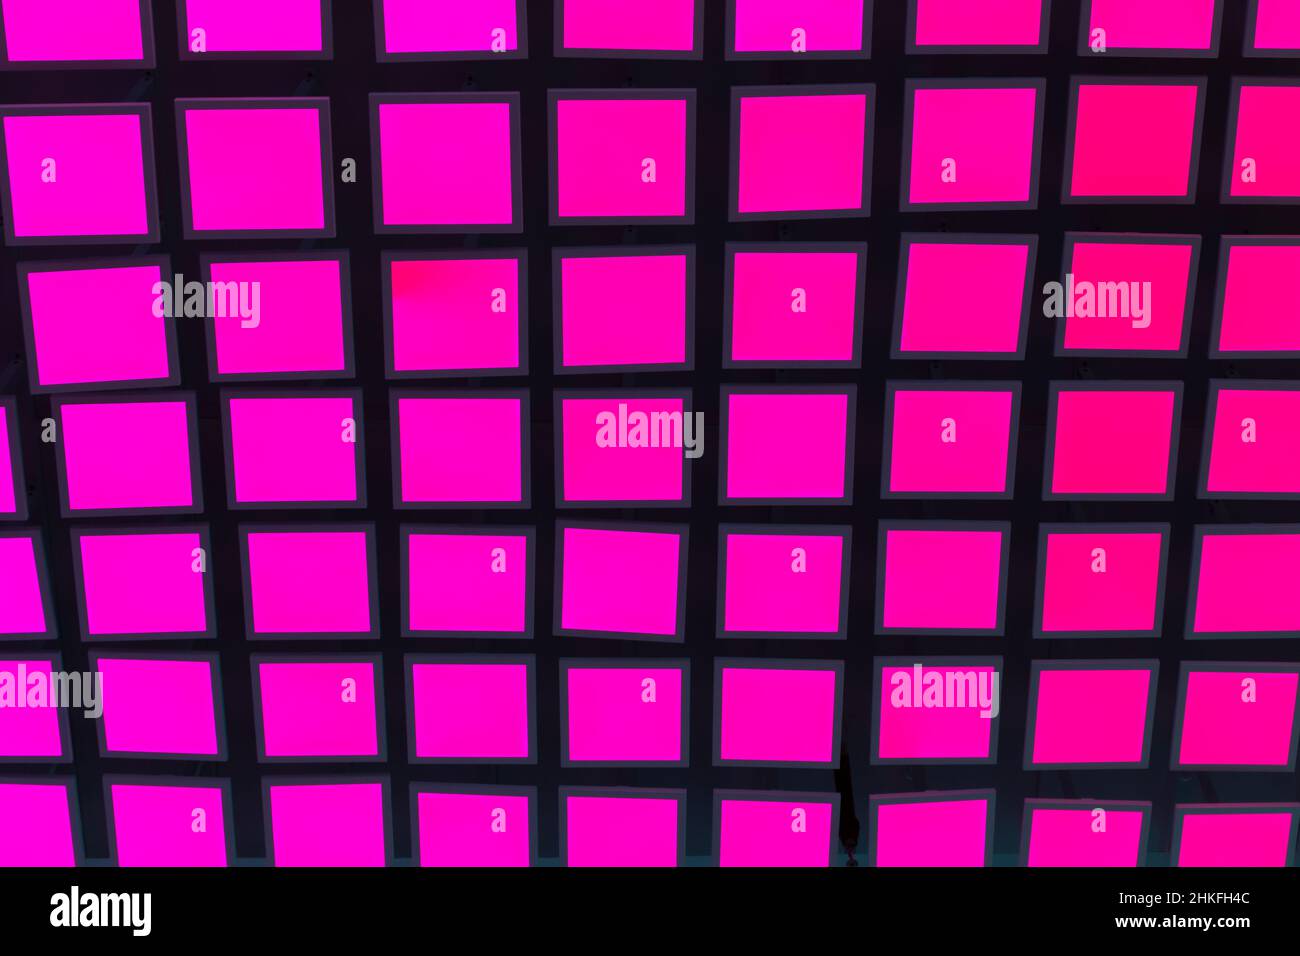 Pink neon vibrant square tiles modern background. Stock Photo